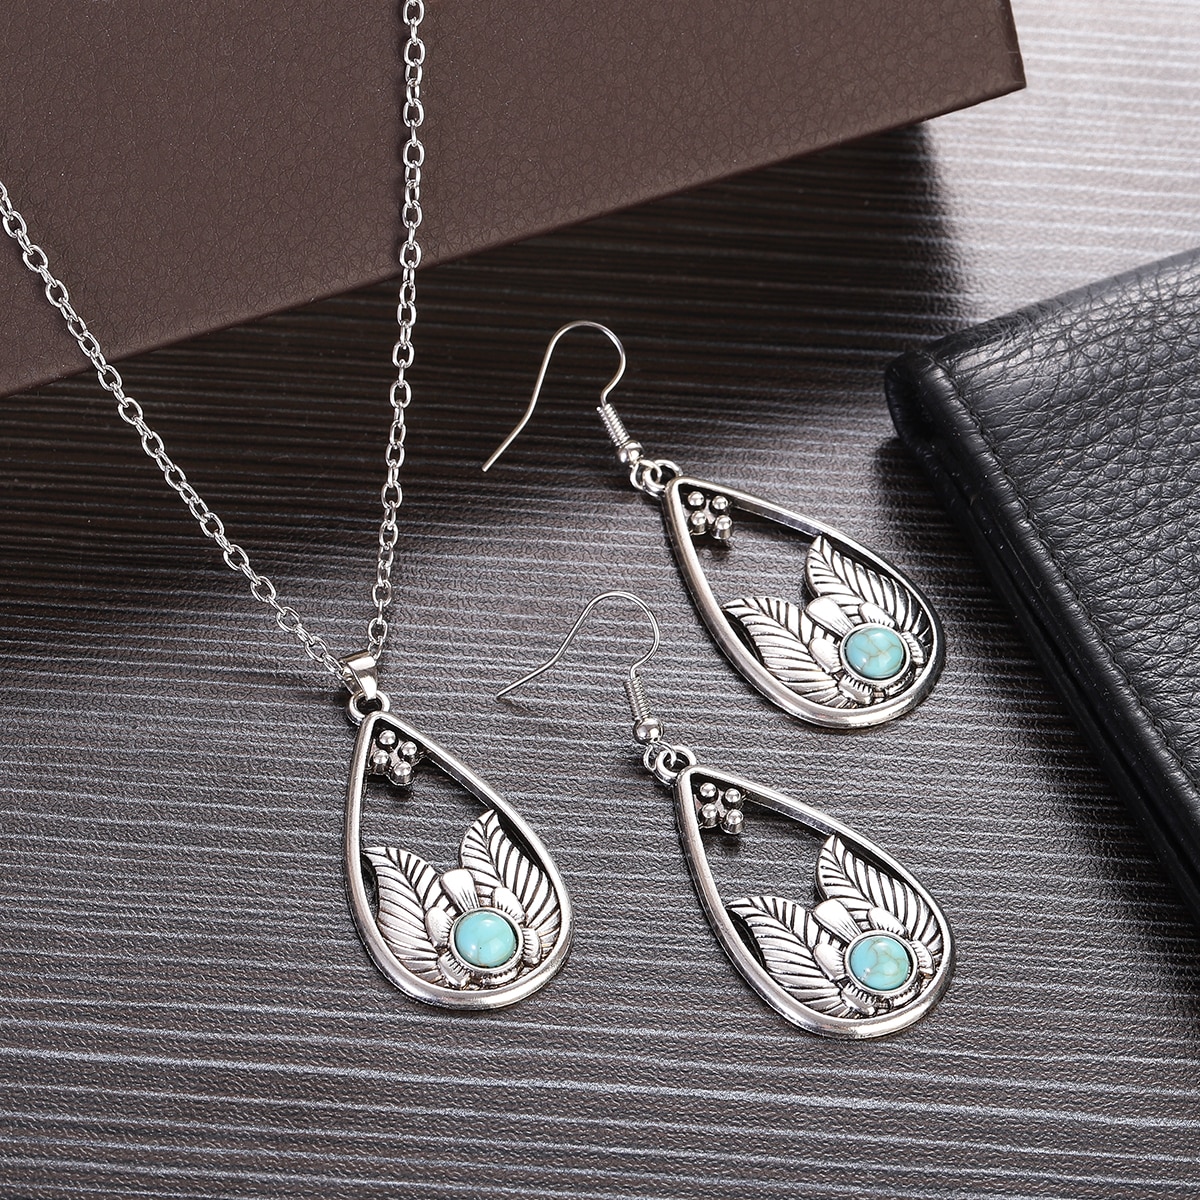 Classic-Ethnic-Silver-Color-Water-Drop-Jewelry-Sets-Ladies-Bohemia-Colorful-Flowers-Pendant-Necklace-1005004920943652-3